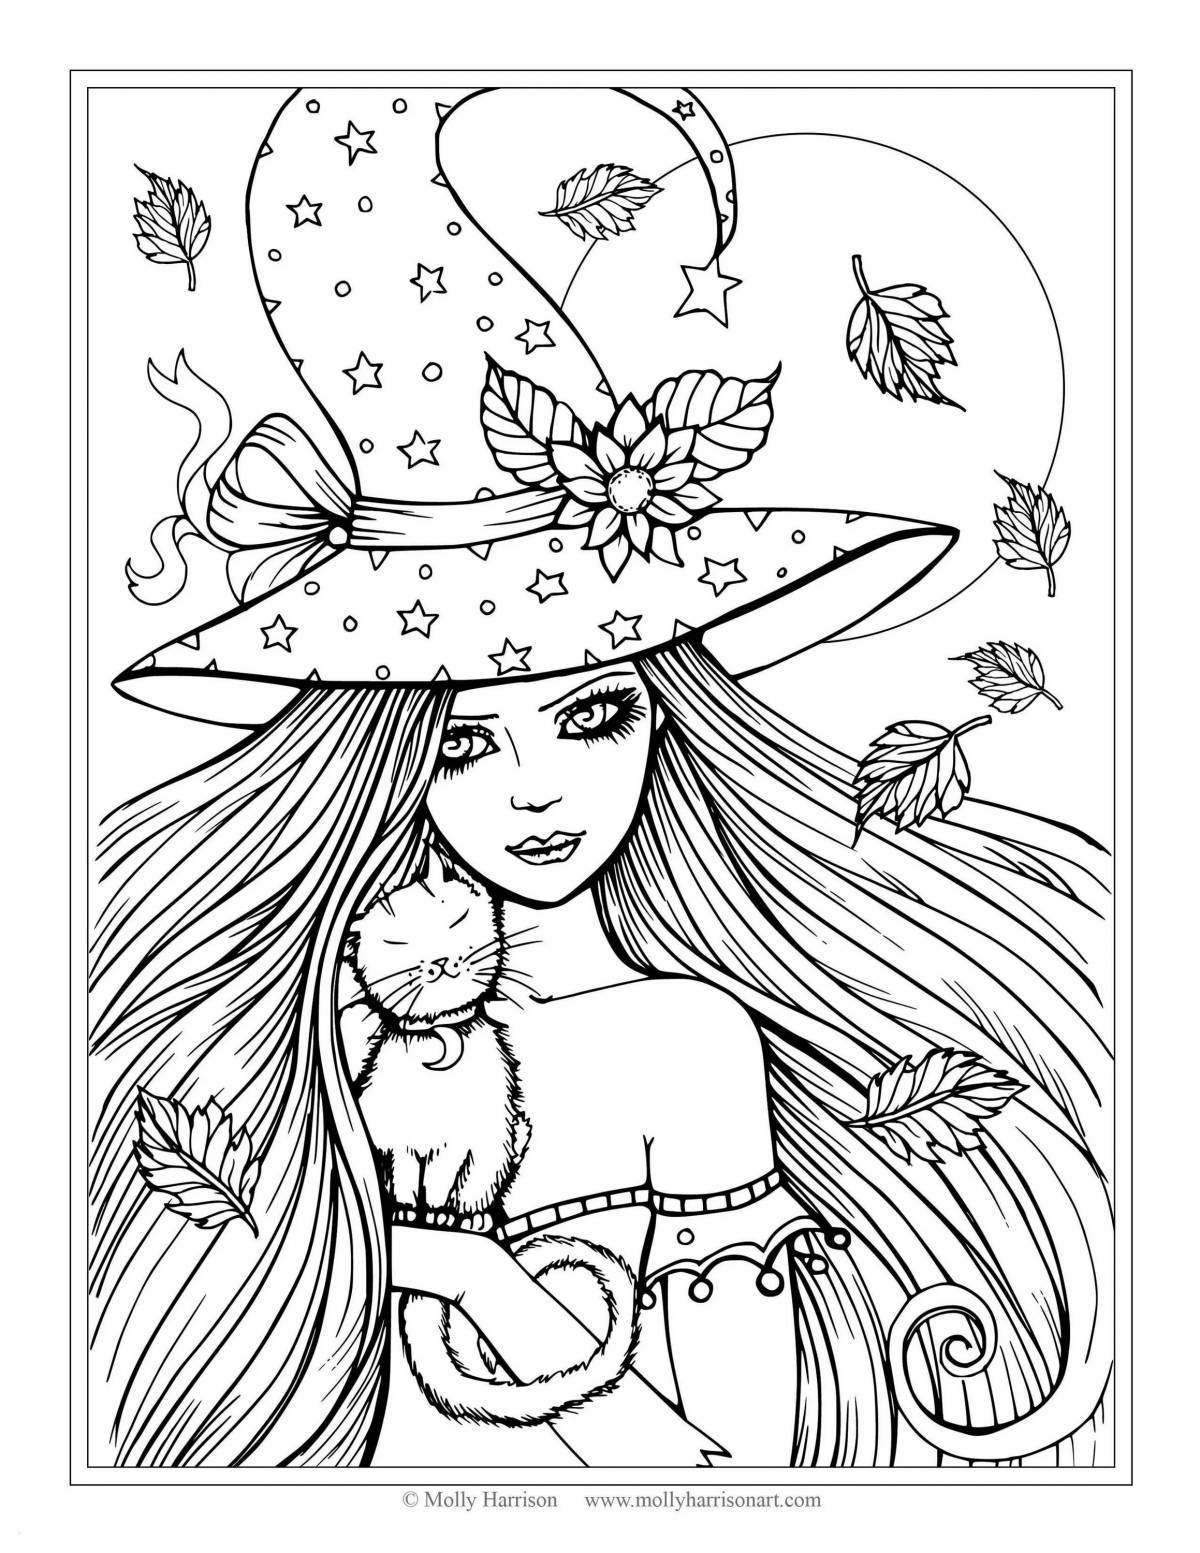 Fun coloring book for 10 year old girls